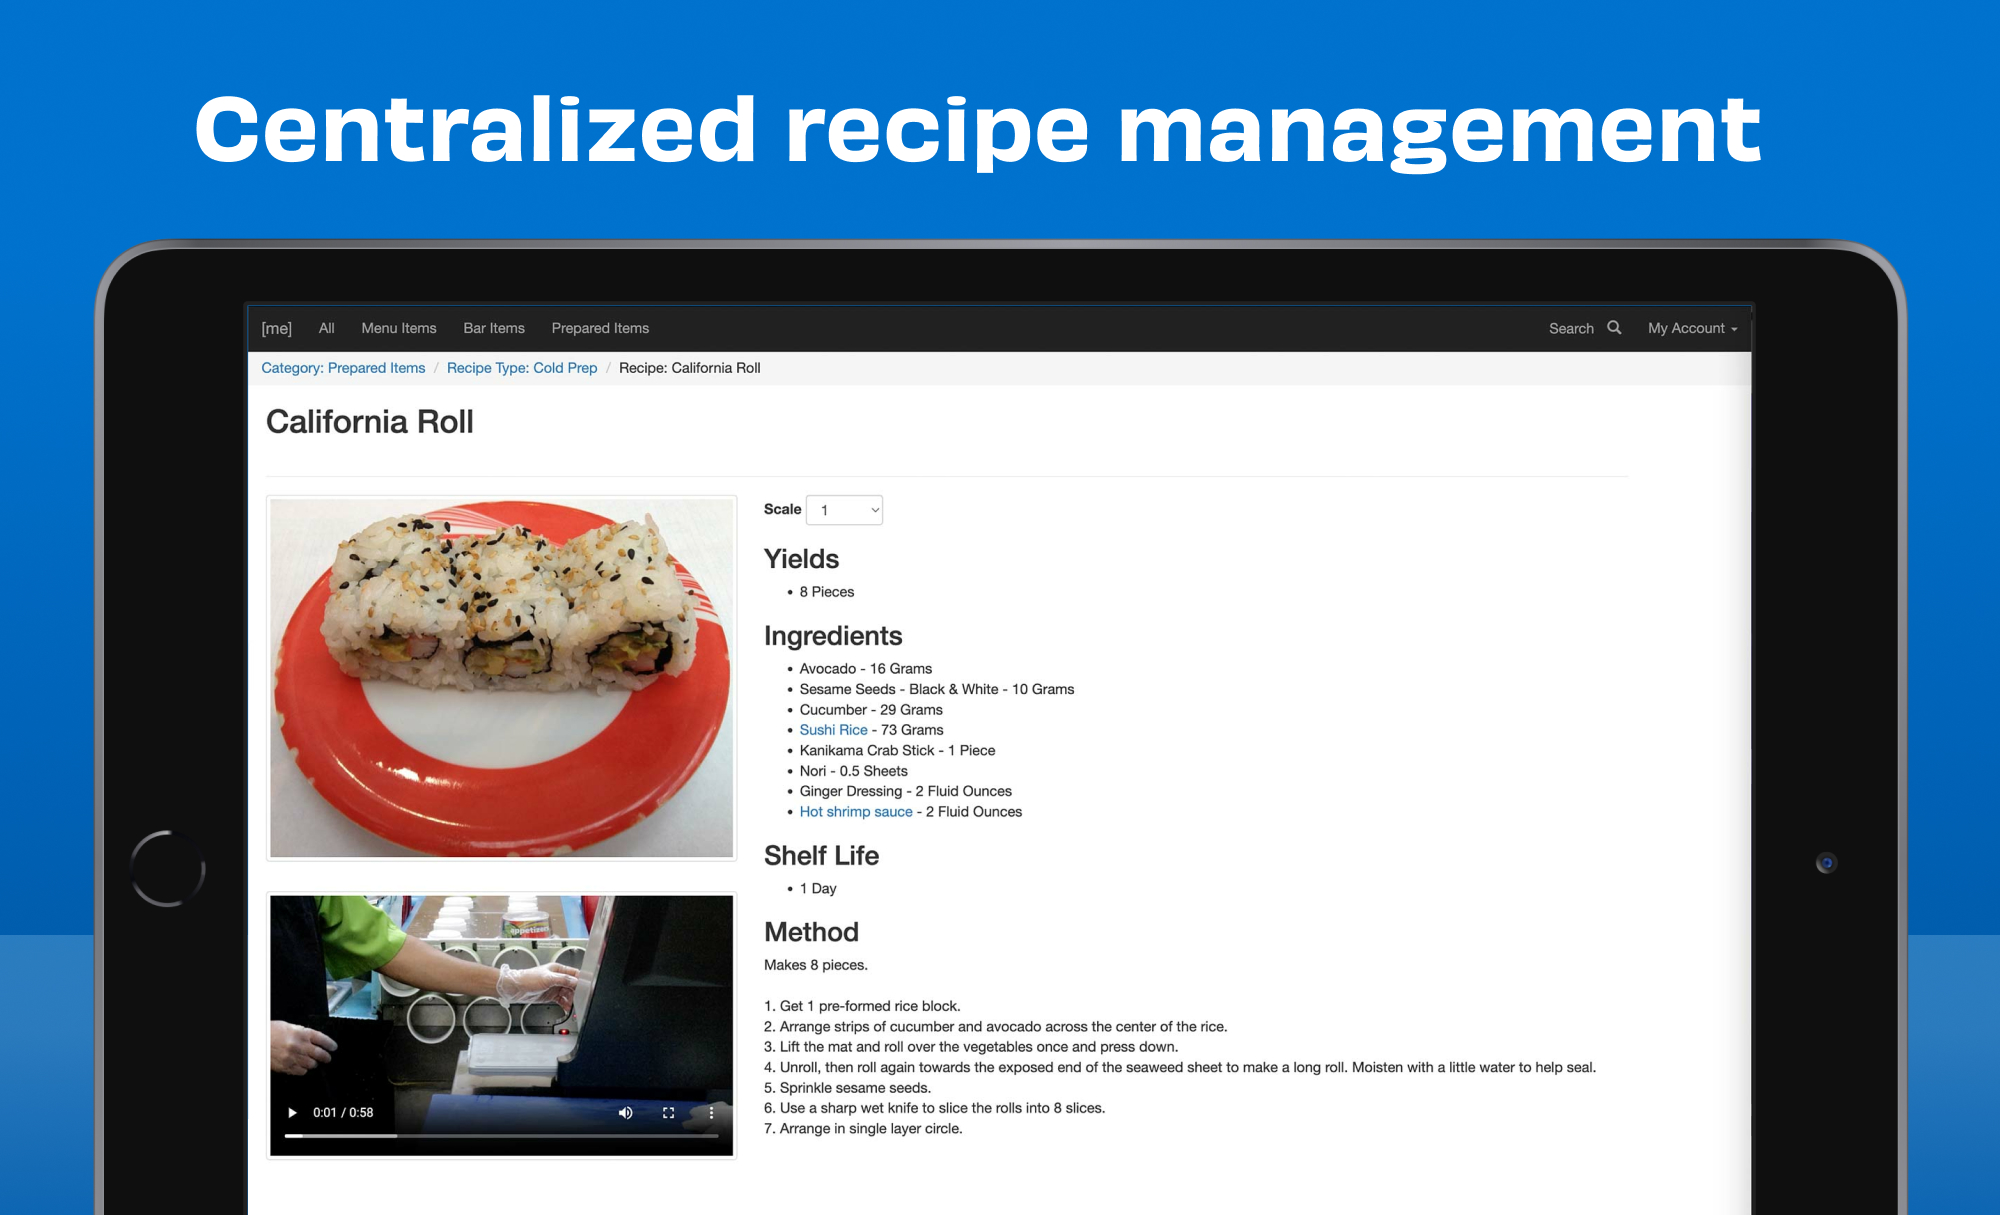 MarginEdge’s recipe management is a centralized solution that calculates plate costs, automatically updates ingredient prices for you, and provides a single, shared playbook for your entire team, even if you have multiple locations.